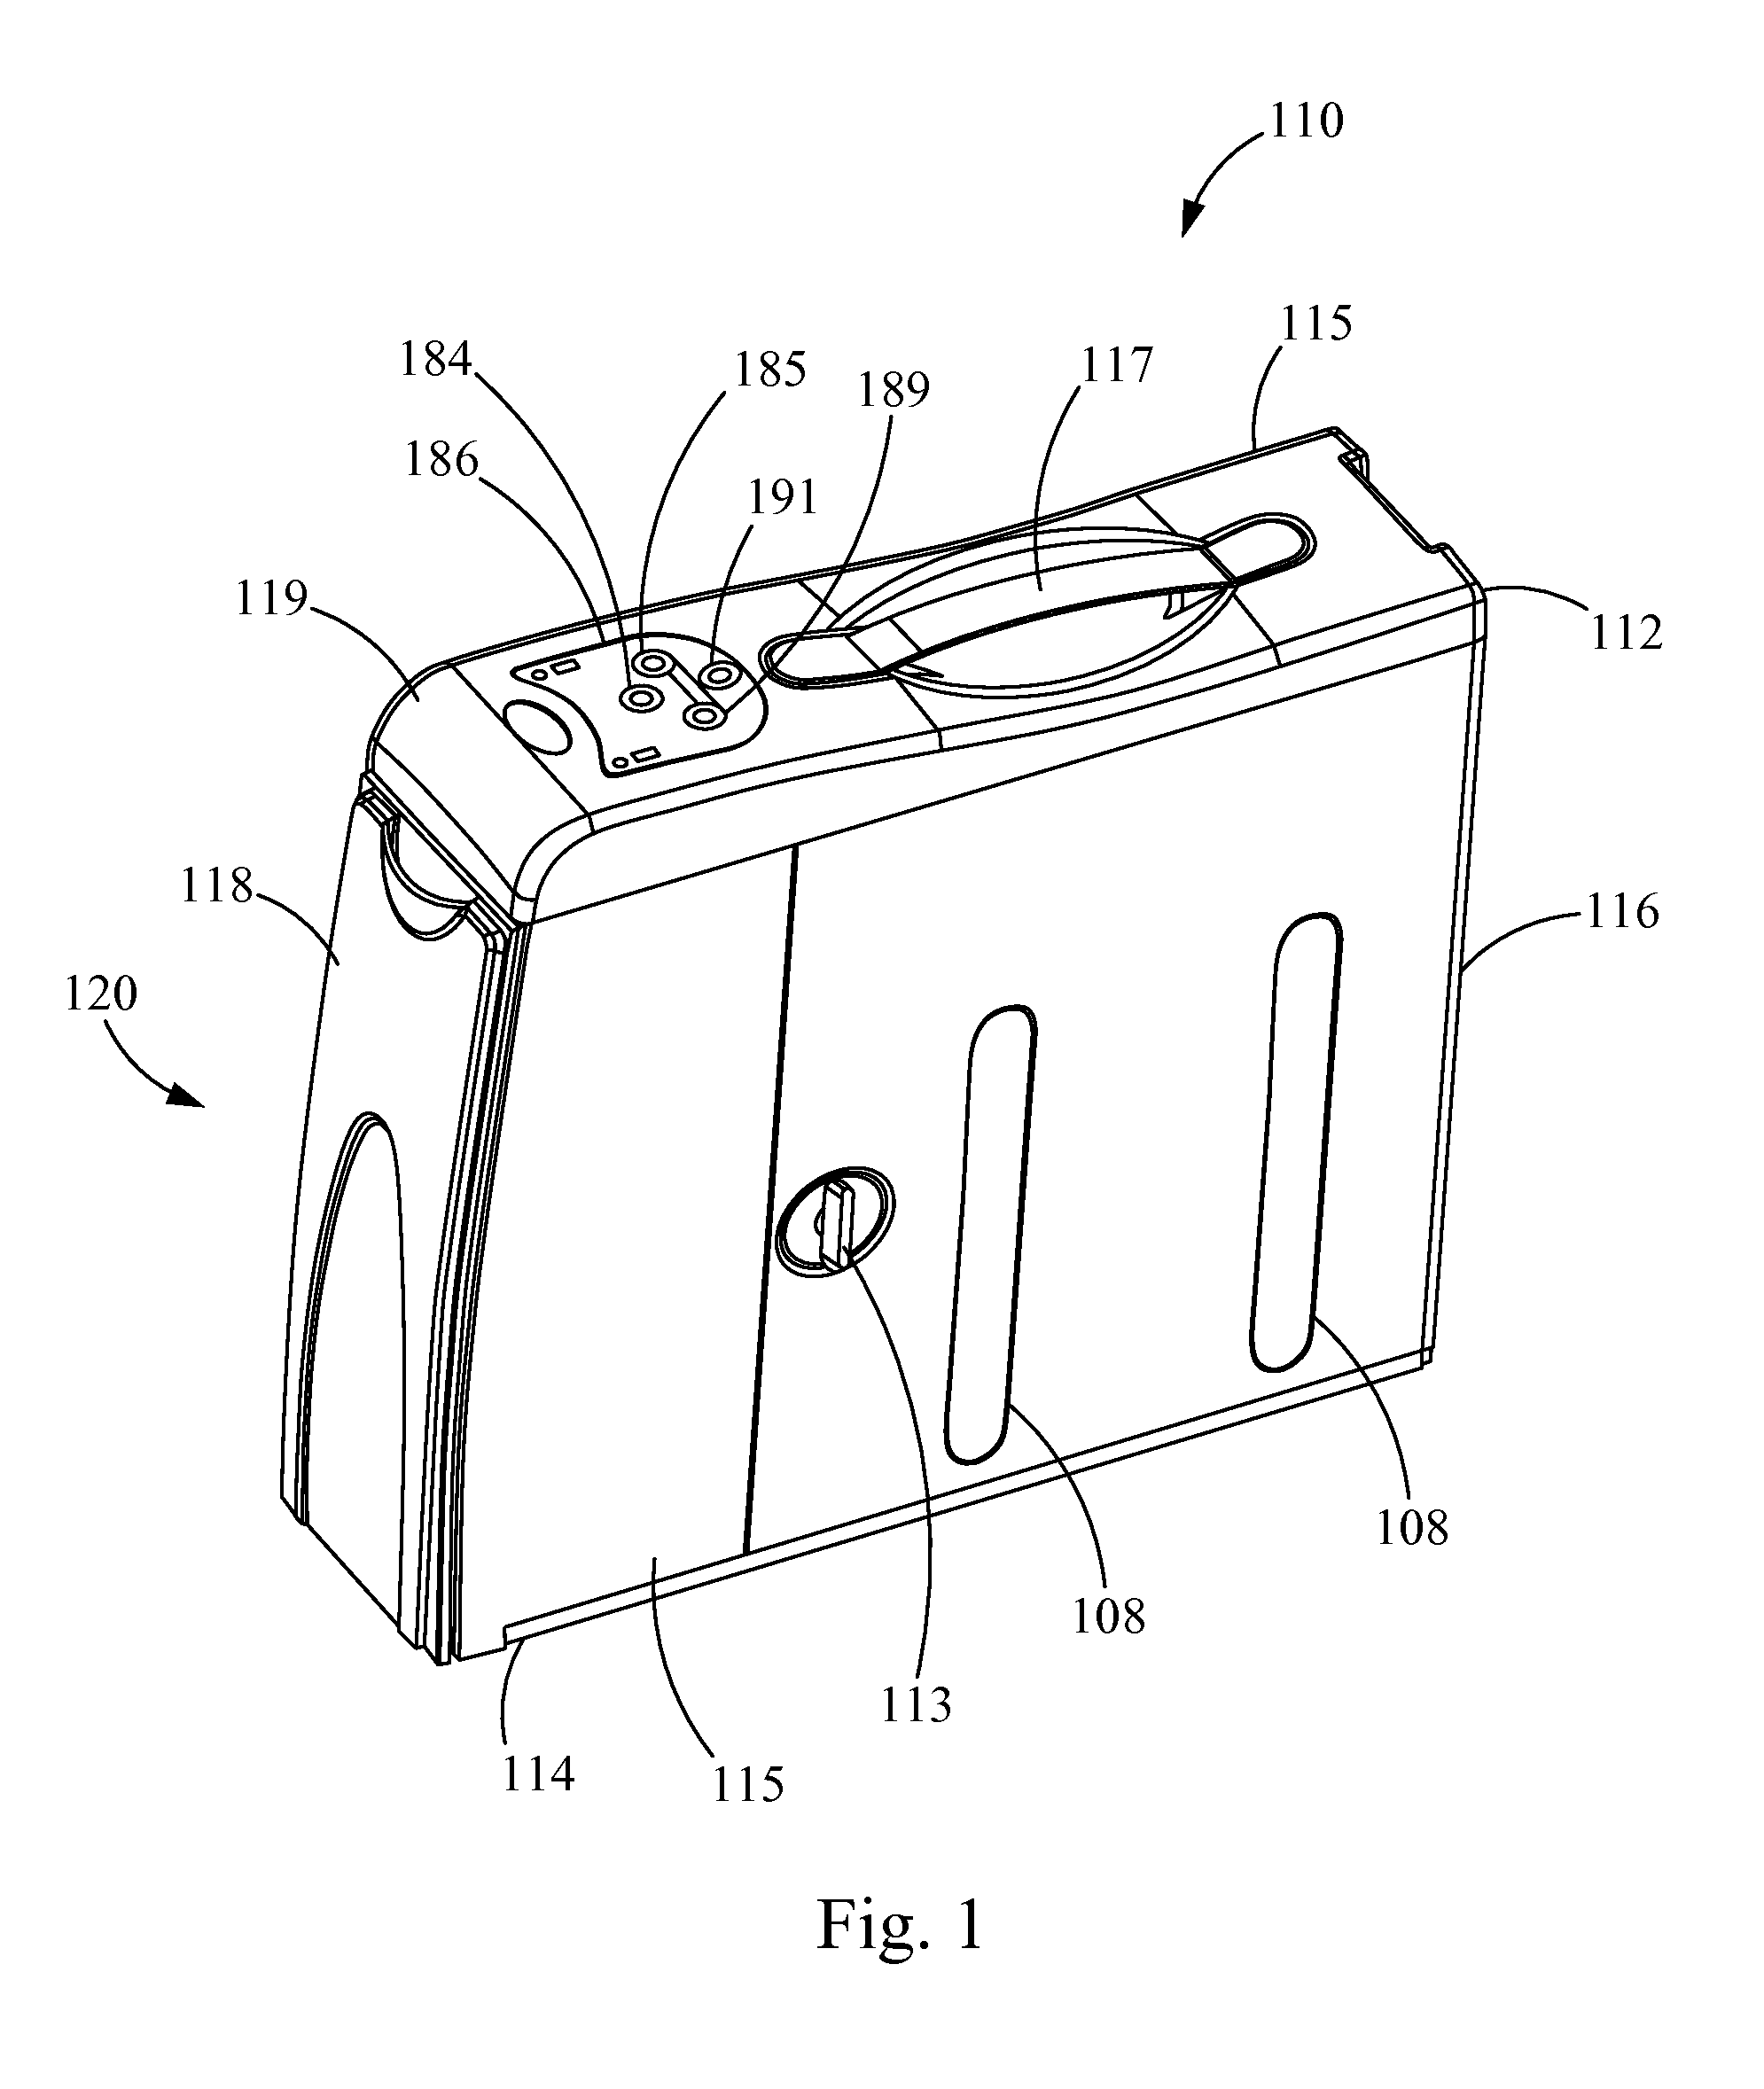 Self-cleansing portable urine collection device